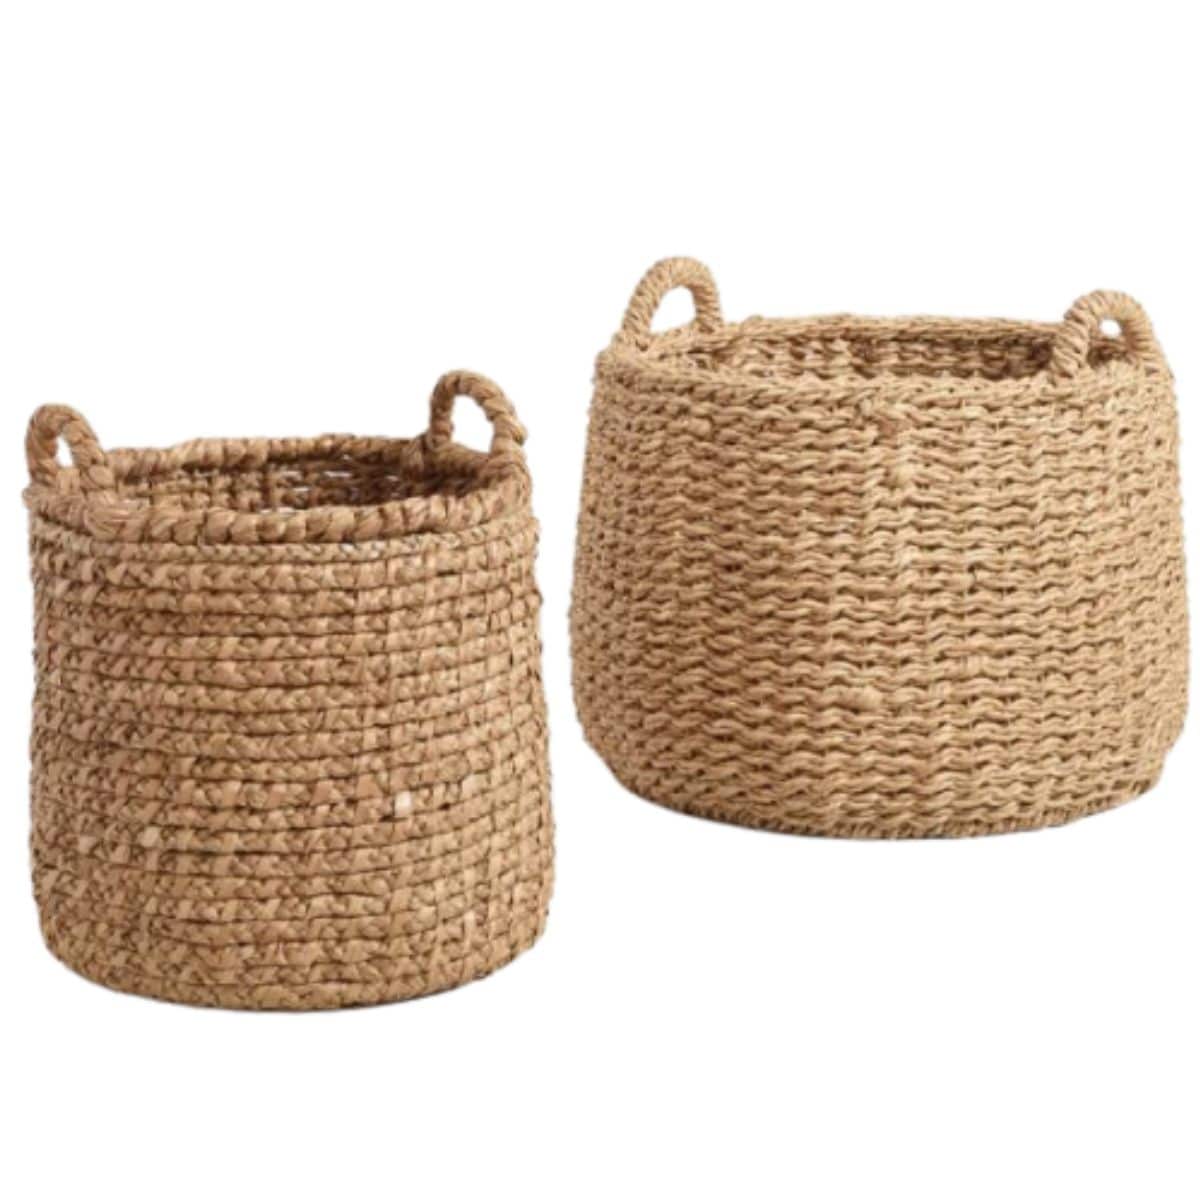 2 Natural Hyacinth Noelle Tote Baskets in different sizes with handles to buy from World Market 